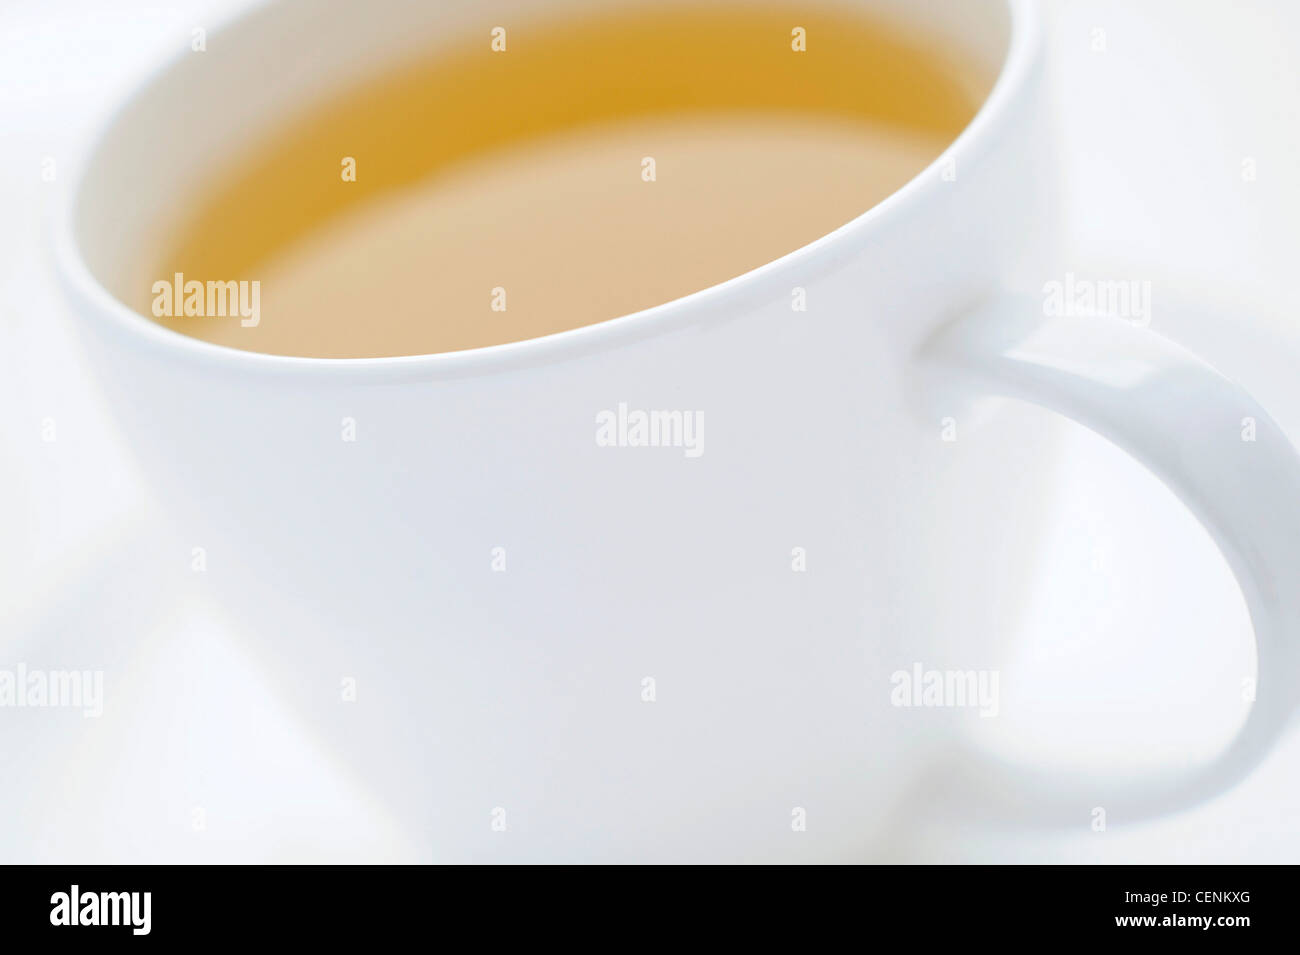 A close up of a white cup and saucer filled with a yellow fruit tea Stock Photo